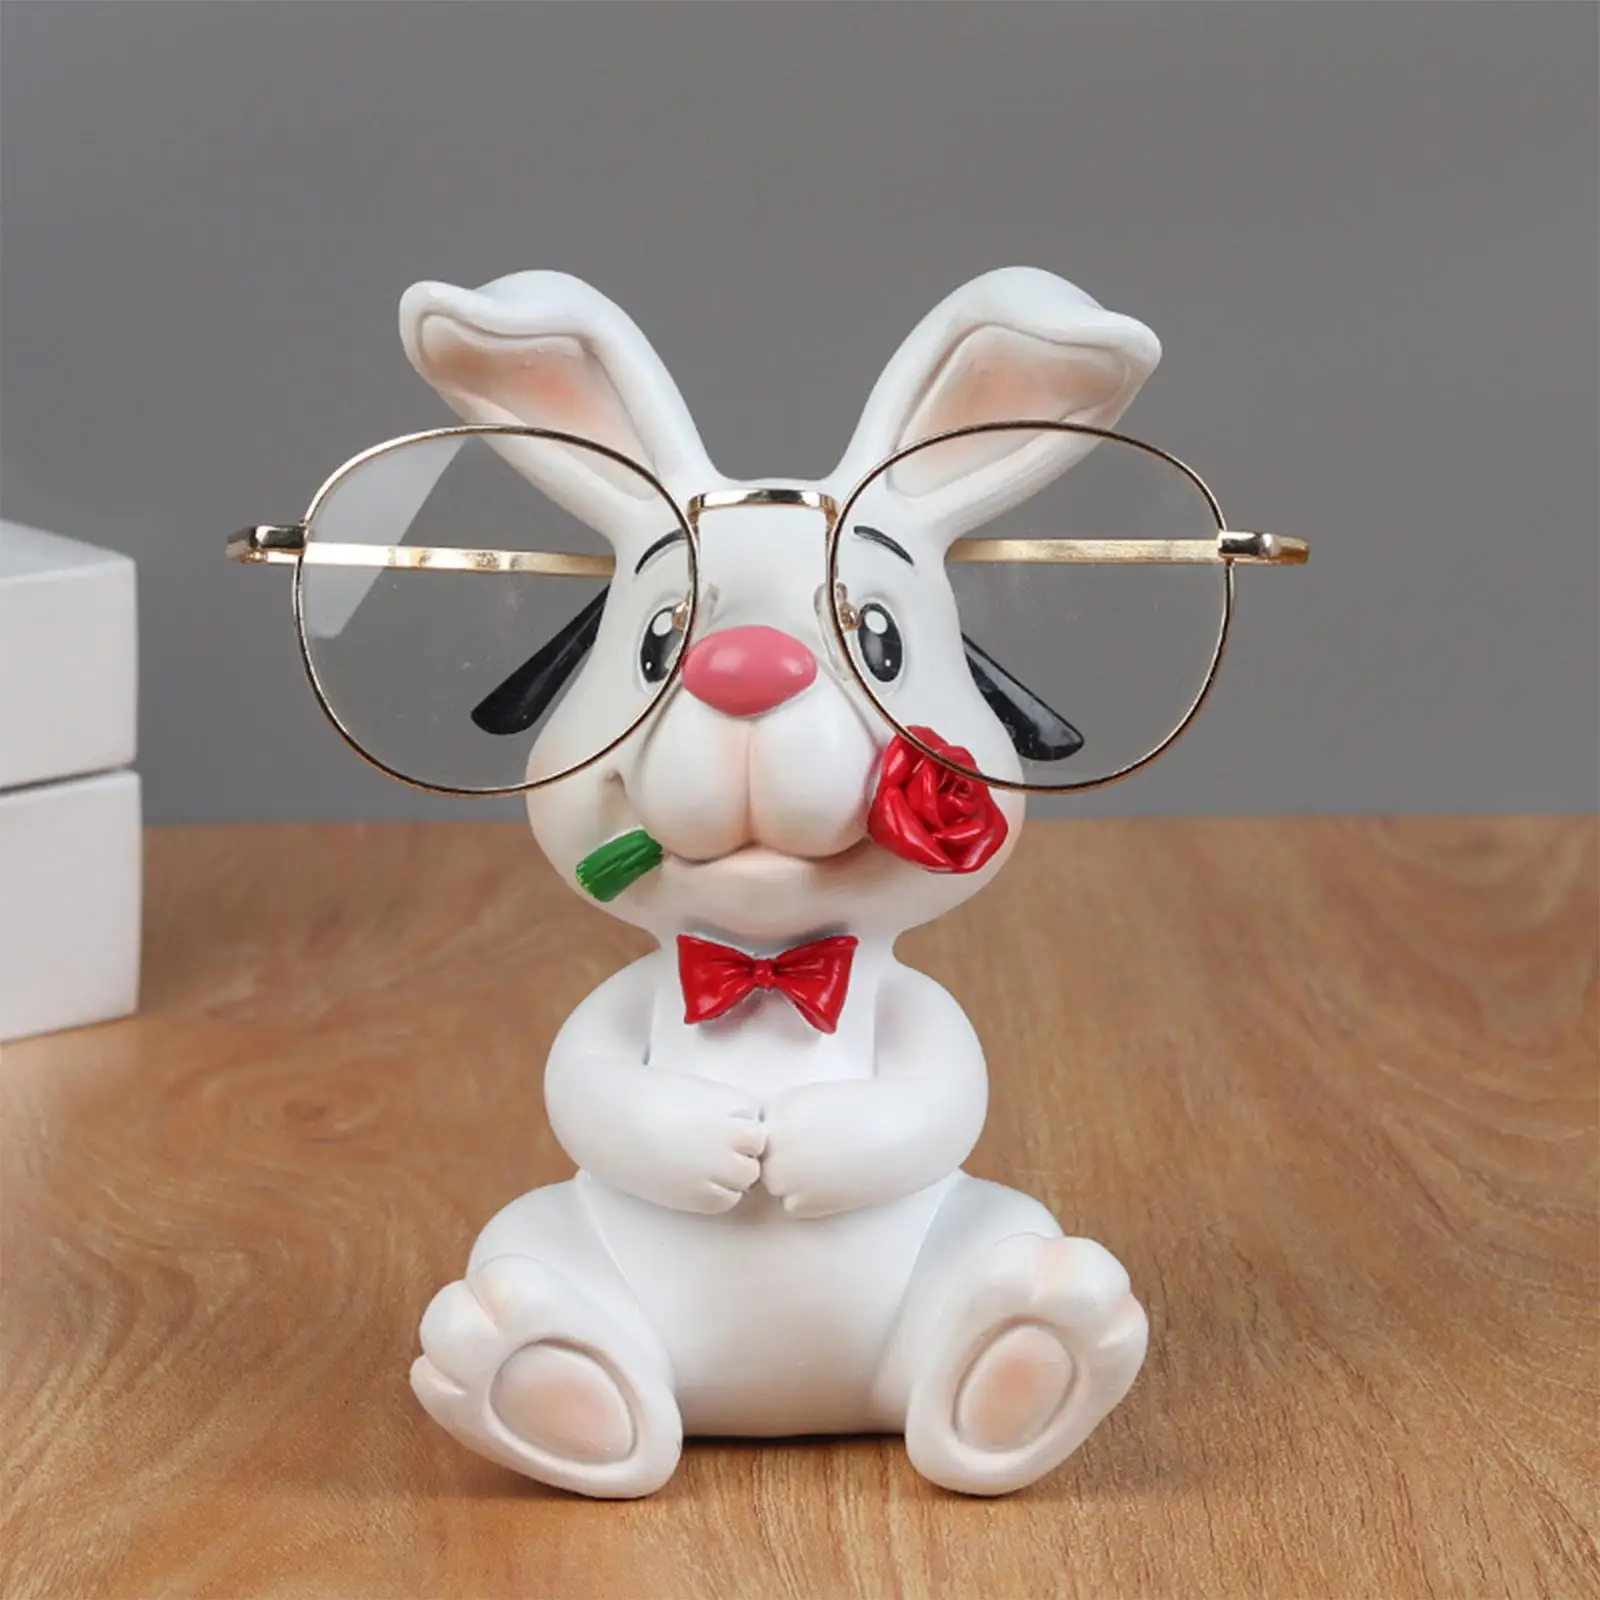 Novelty Animal Shape Glasses Holder Stand Case Spectacles Sunglasses Display